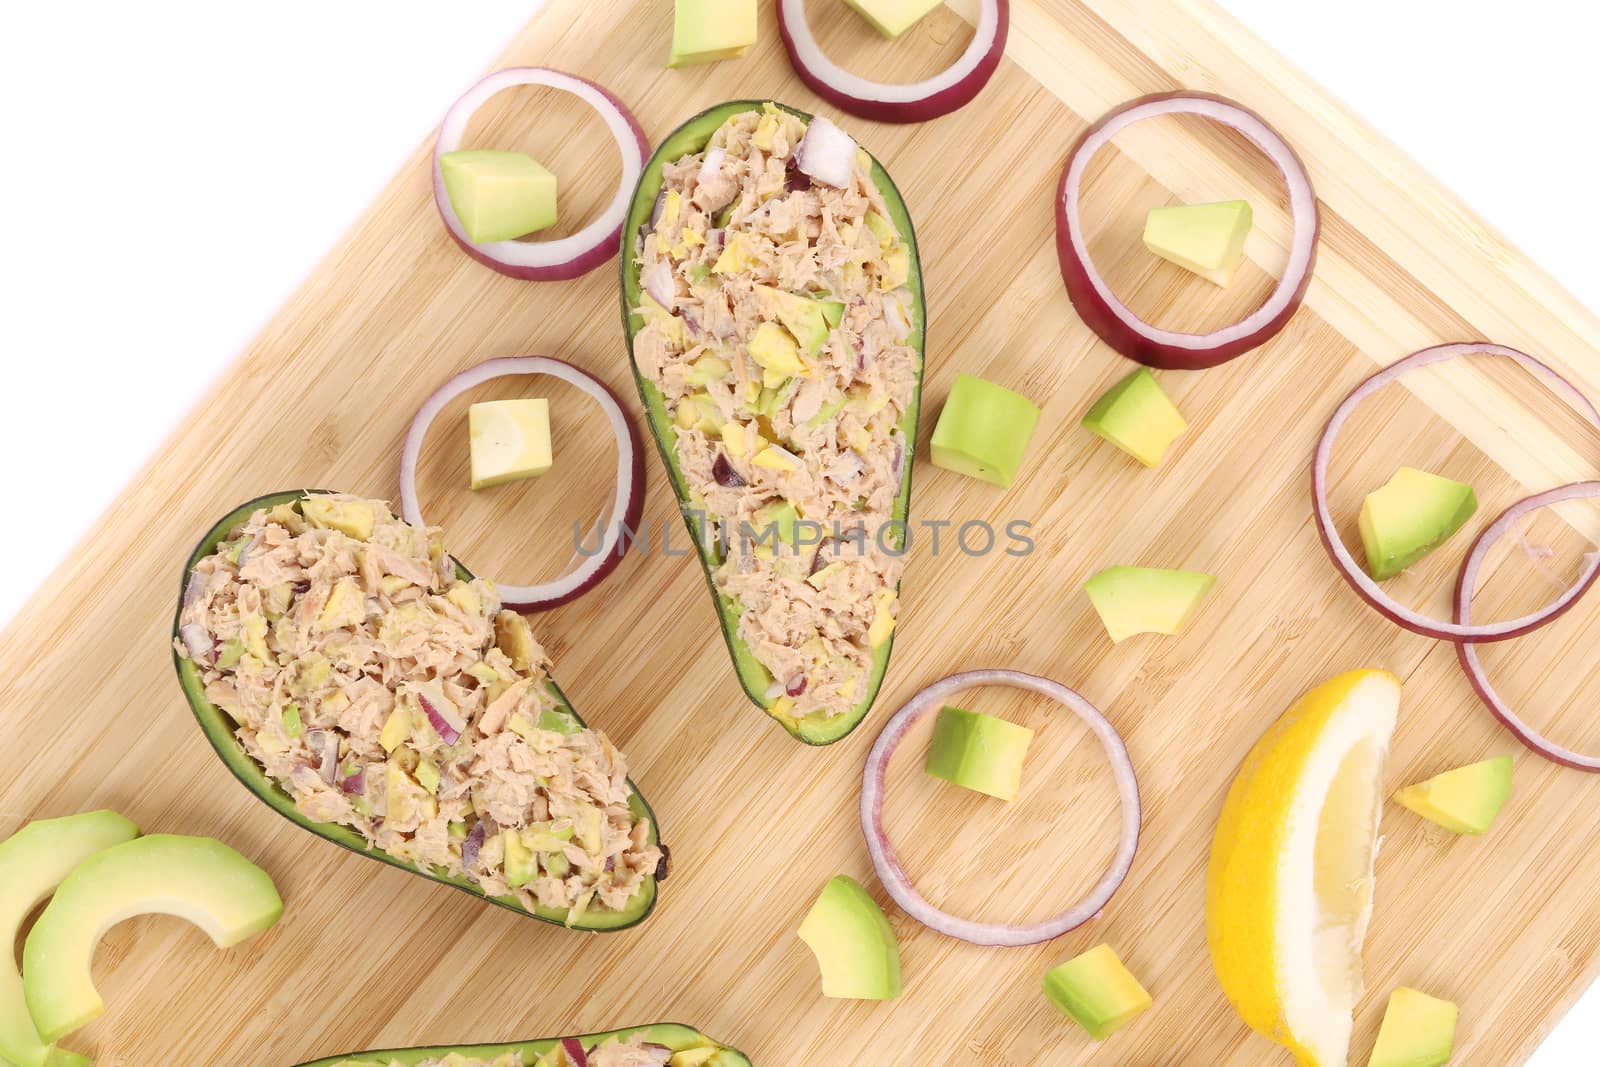 Avocado salad with tuna. Isolated on a white background.